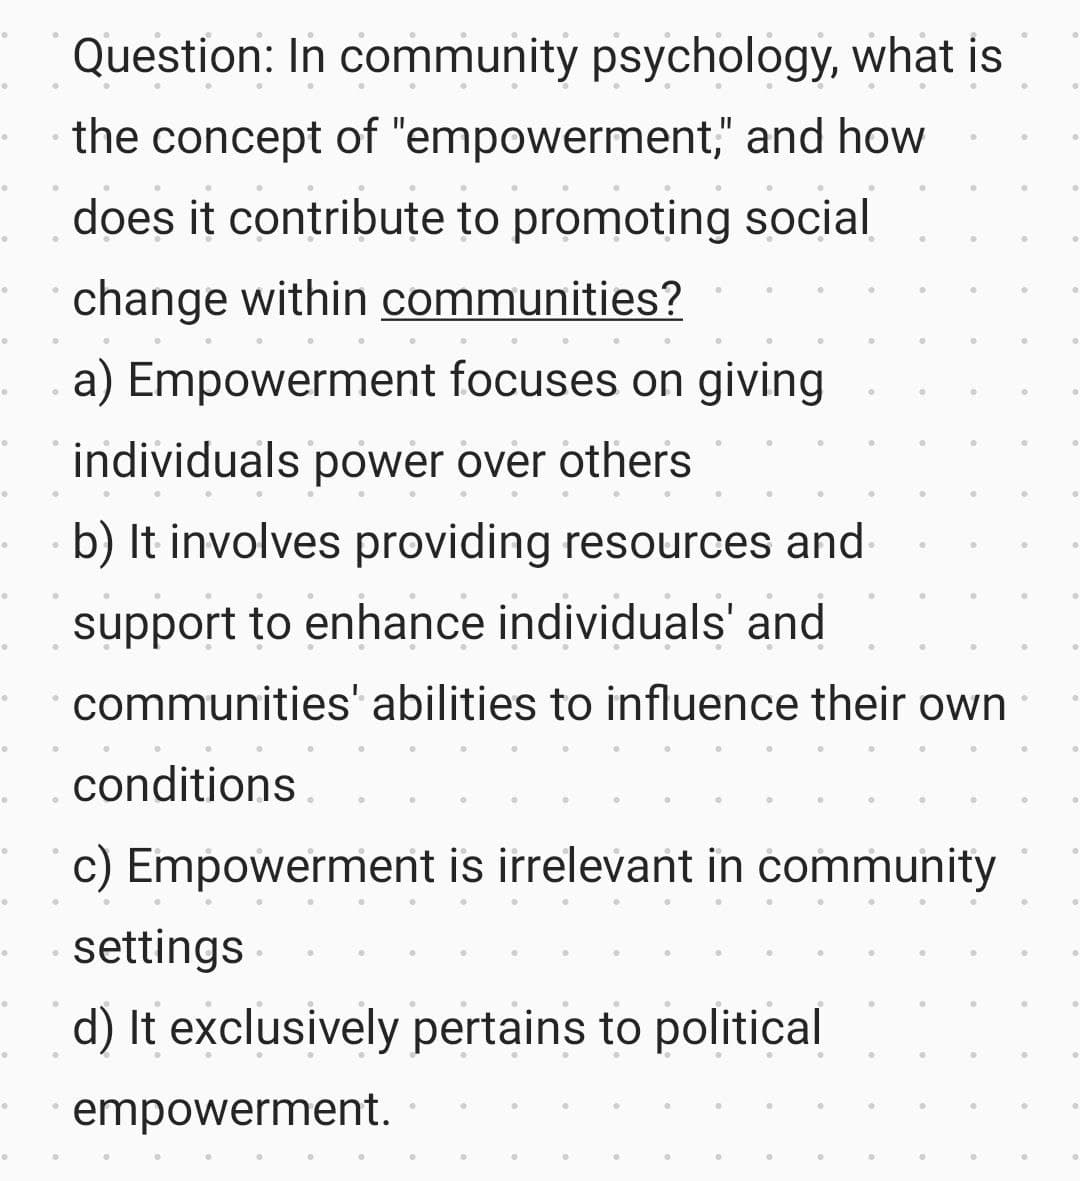 0
。
0
。
0
。
●
0
.
●
Question: In community psychology, what is
the concept of "empowerment," and how
does it contribute to promoting social
change within communities?
a) Empowerment focuses on giving
individuals power over others
b) It involves providing resources and
support to enhance individuals' and
communities' abilities to influence their own
conditions
c) Empowerment is irrelevant in community
settings
d) It exclusively pertains to political
empowerment.